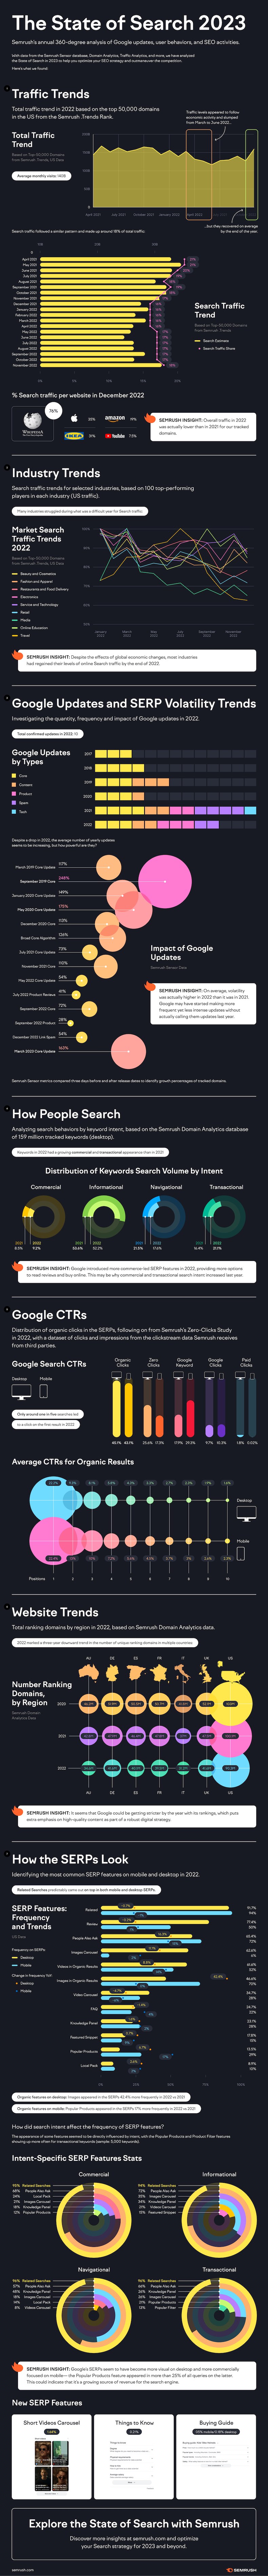 The State of Search 2023 infographic by Semrush